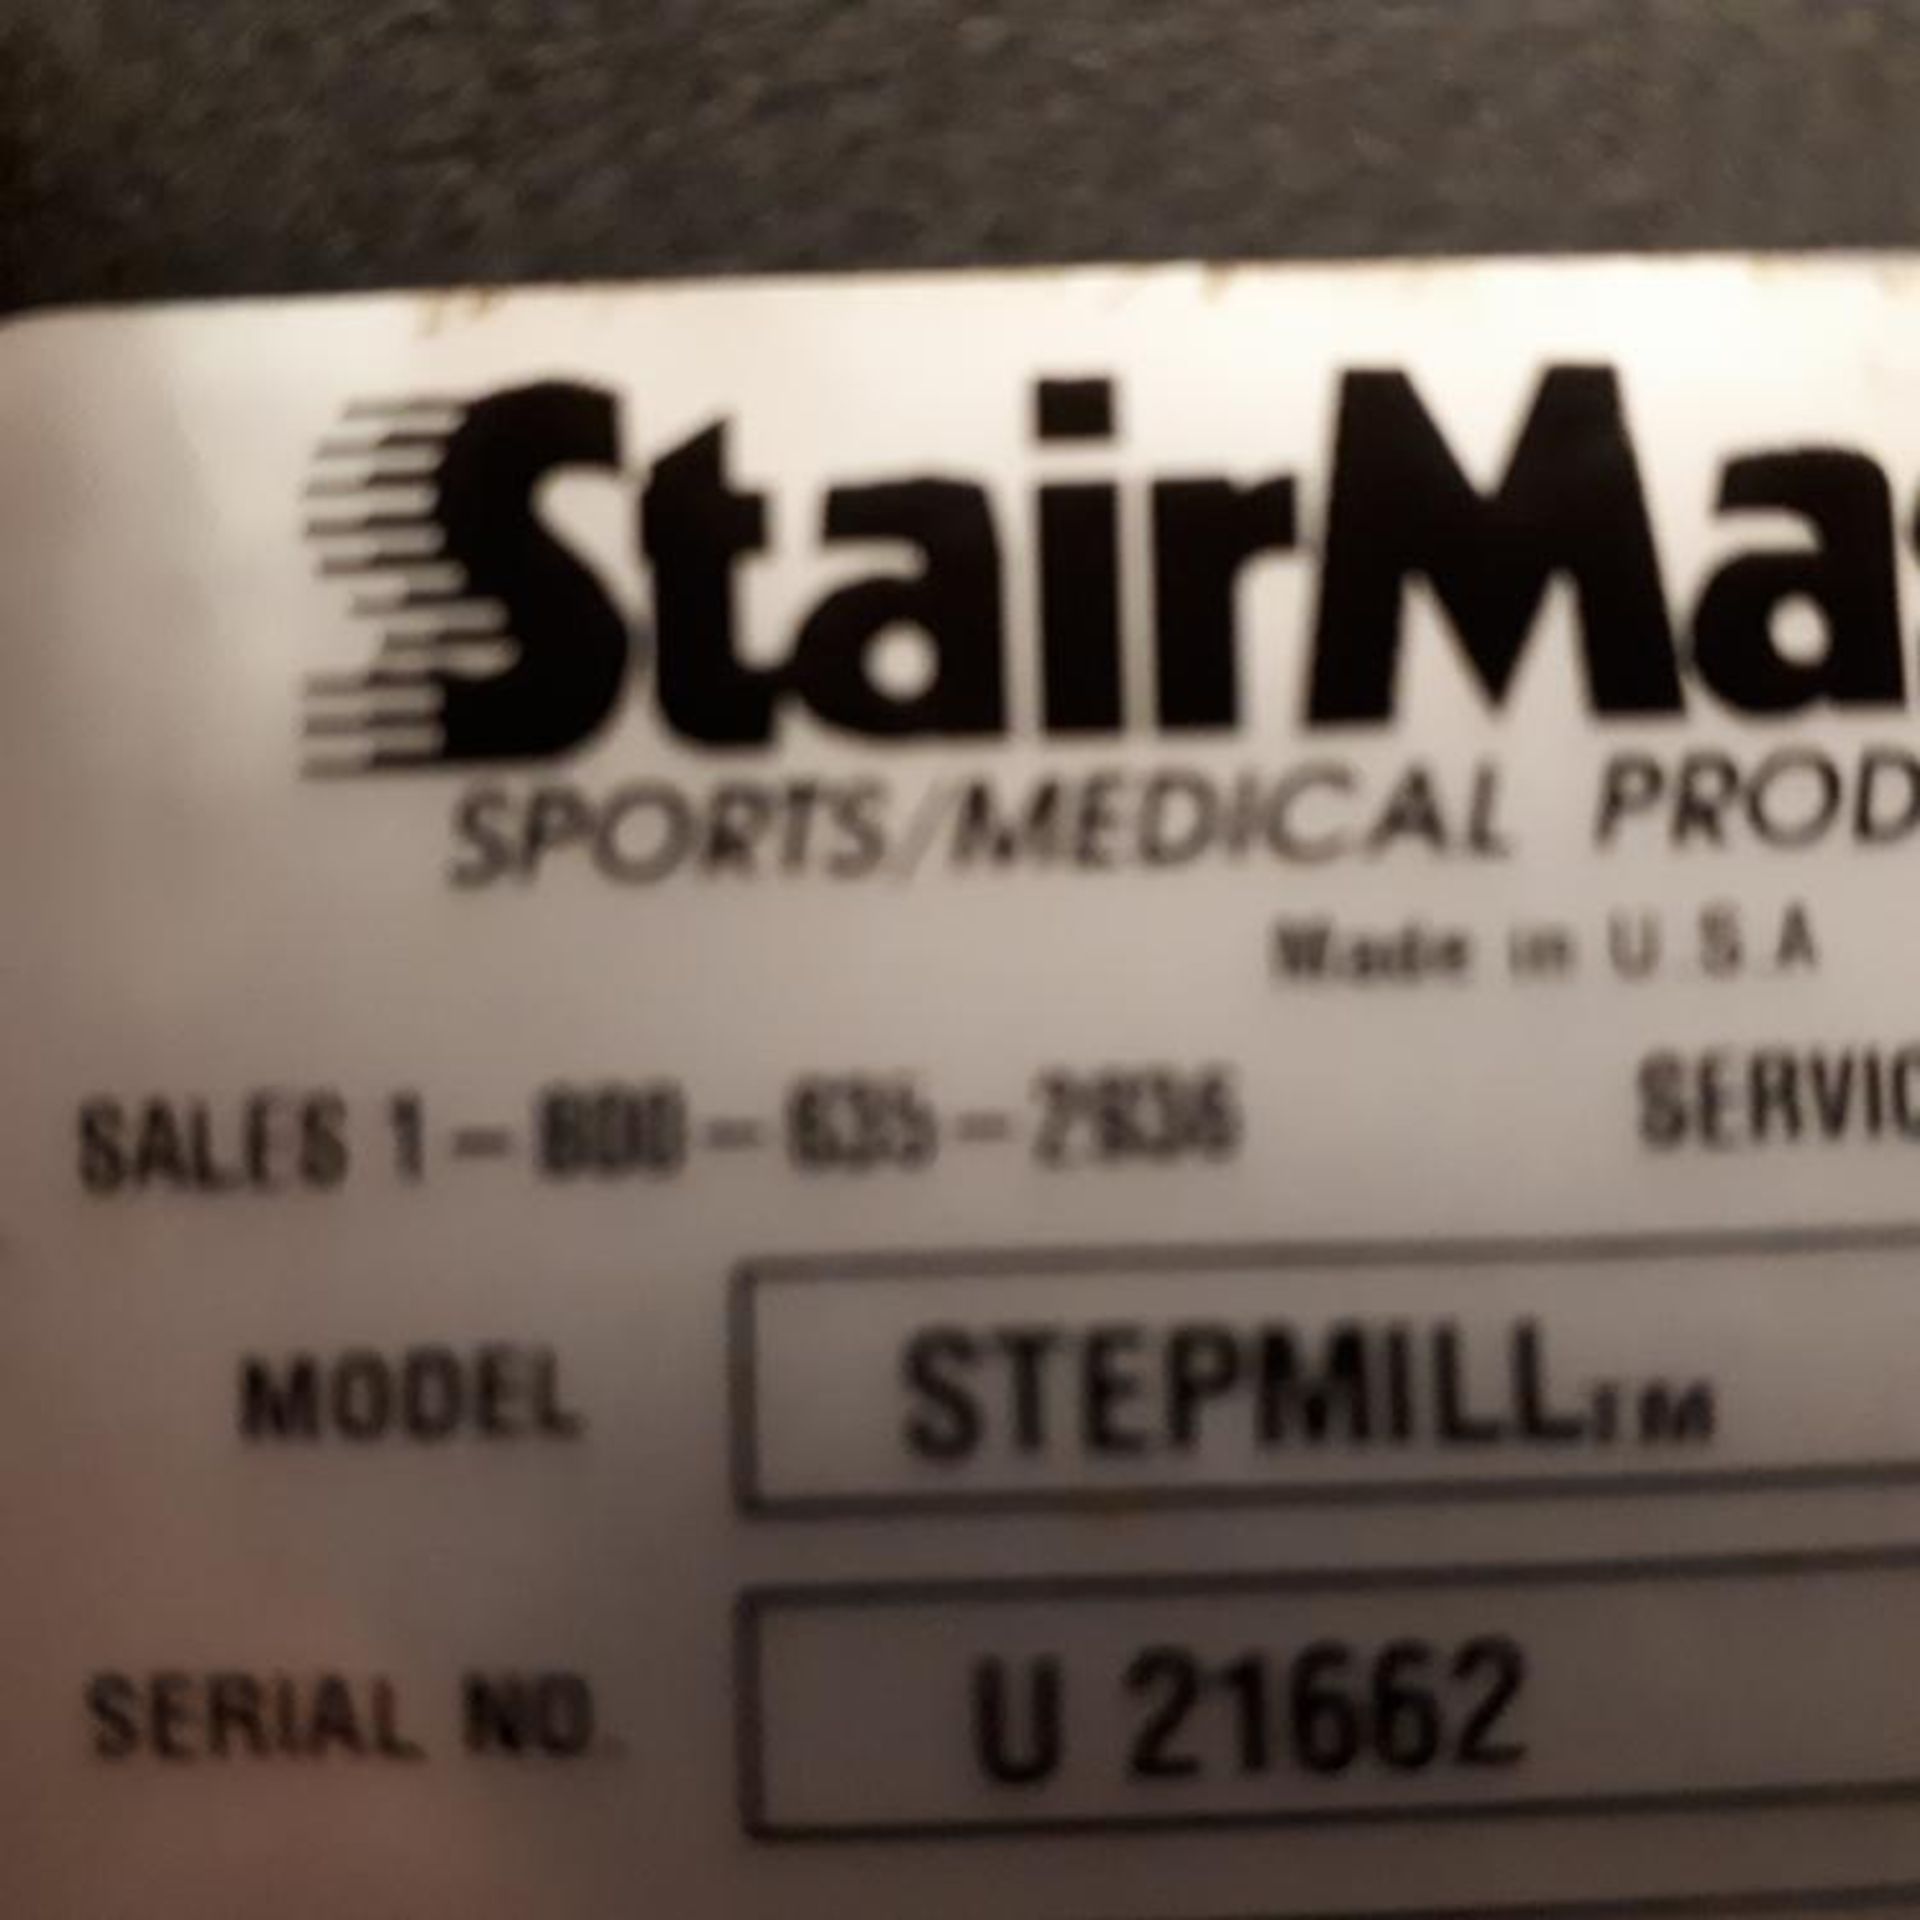 STEPMILL, ESCALIER STAIRMASTER - Image 4 of 4